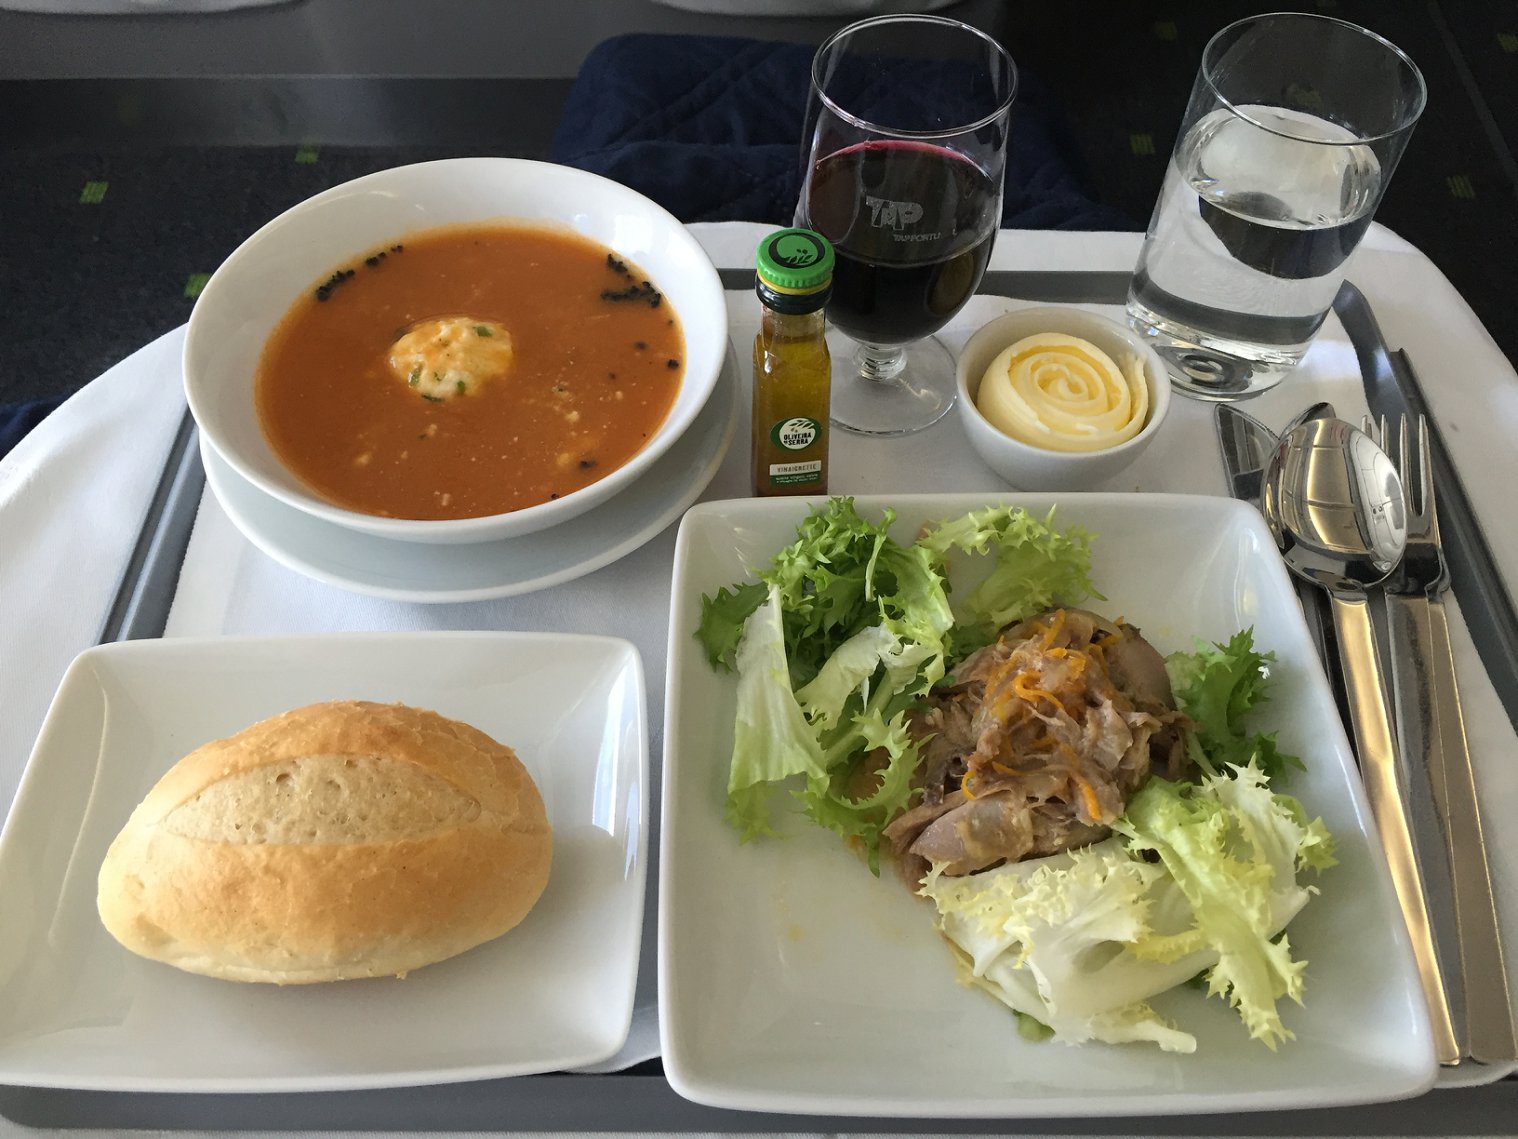 TAP Portugal Business class soup and salad